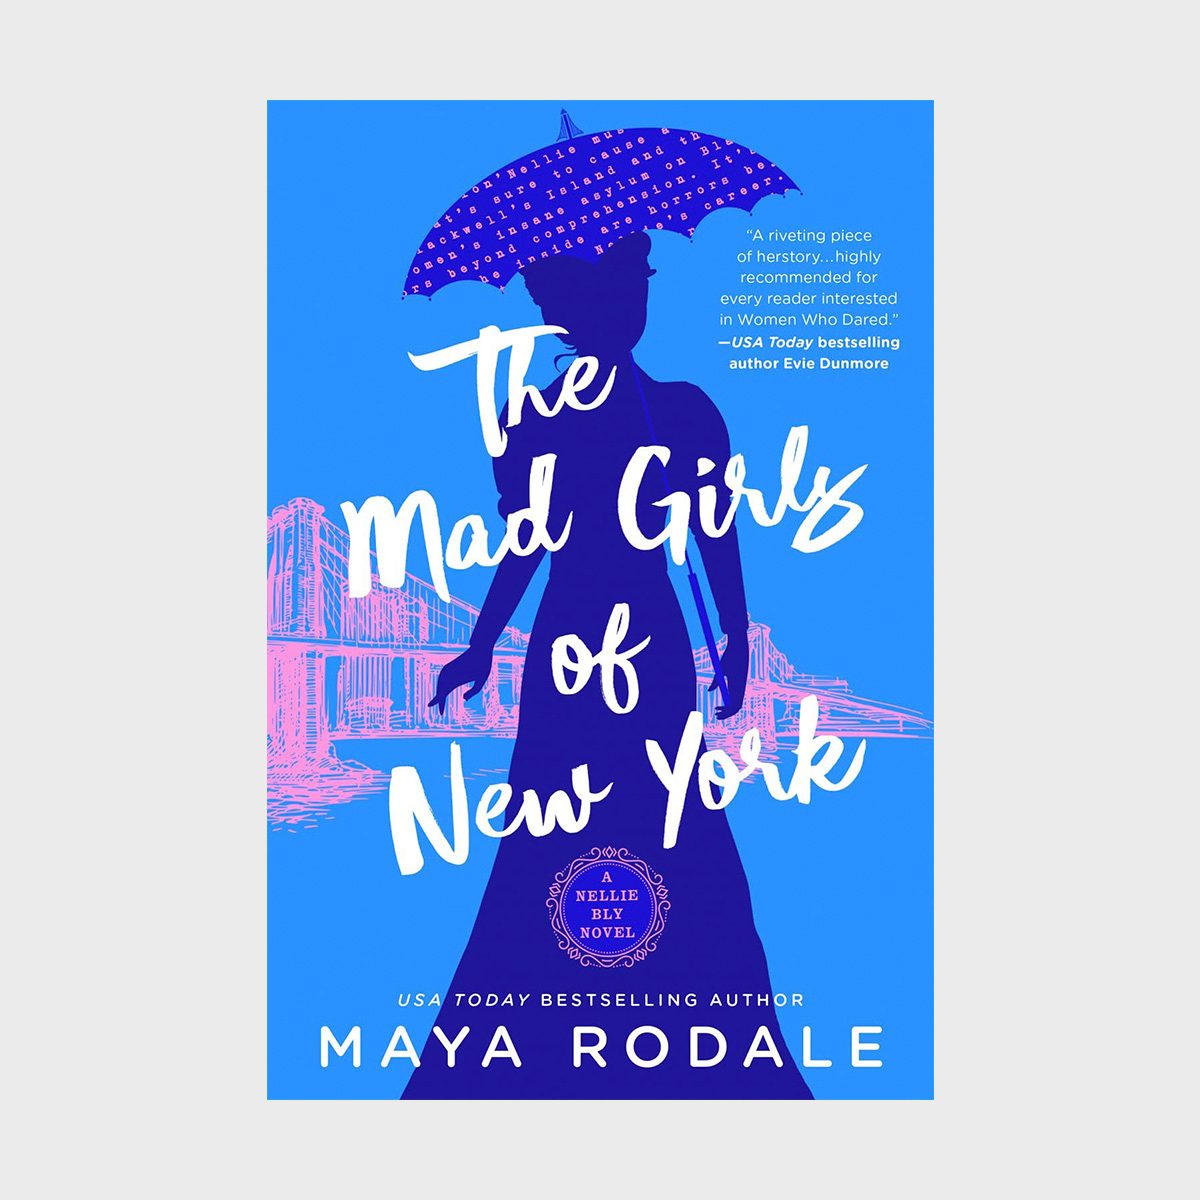 The Mad Girls of New York